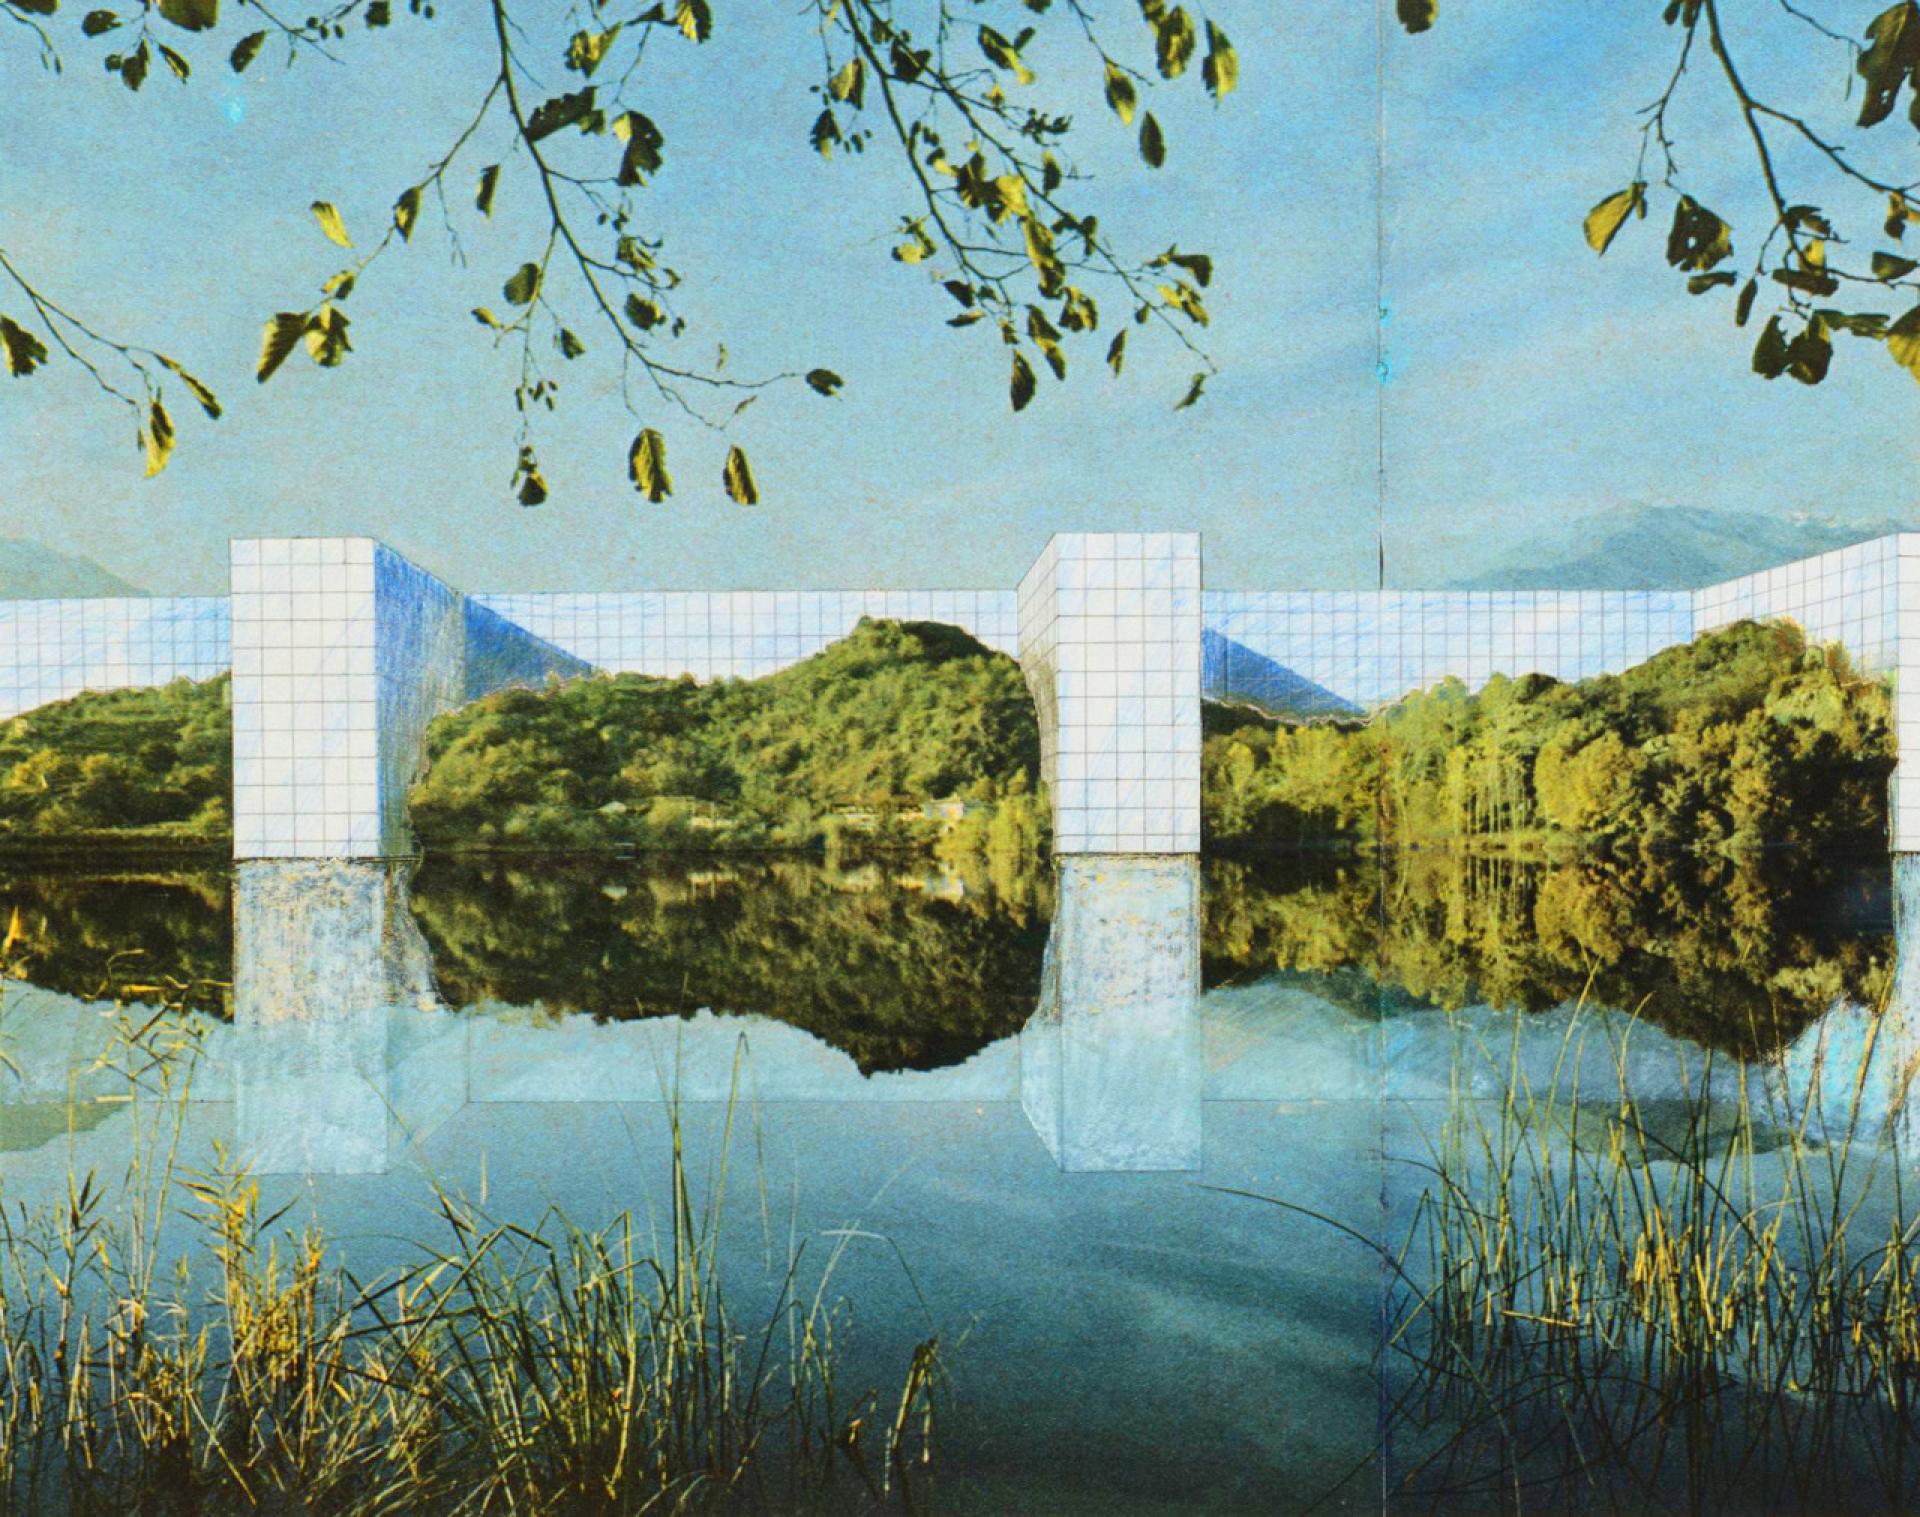 Fragment of the Continuous Monument On the River, Superstudio (1969-70)